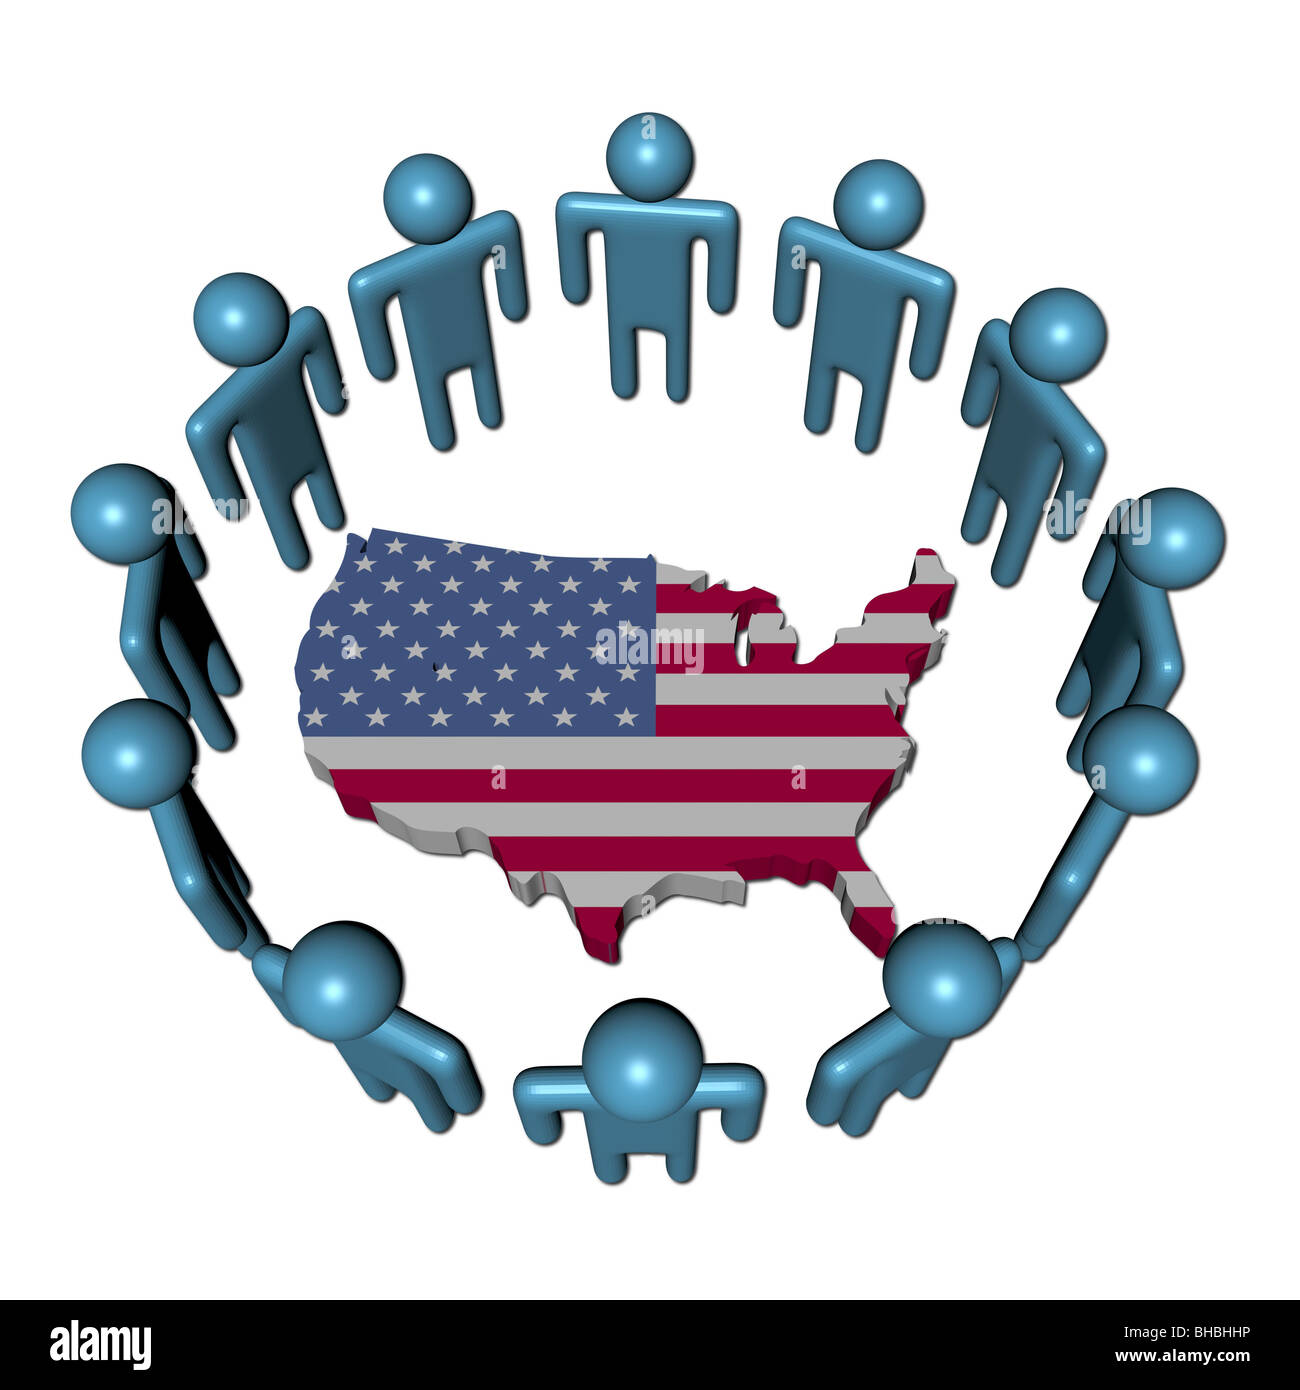 Circle of abstract people around USA map flag illustration Stock Photo